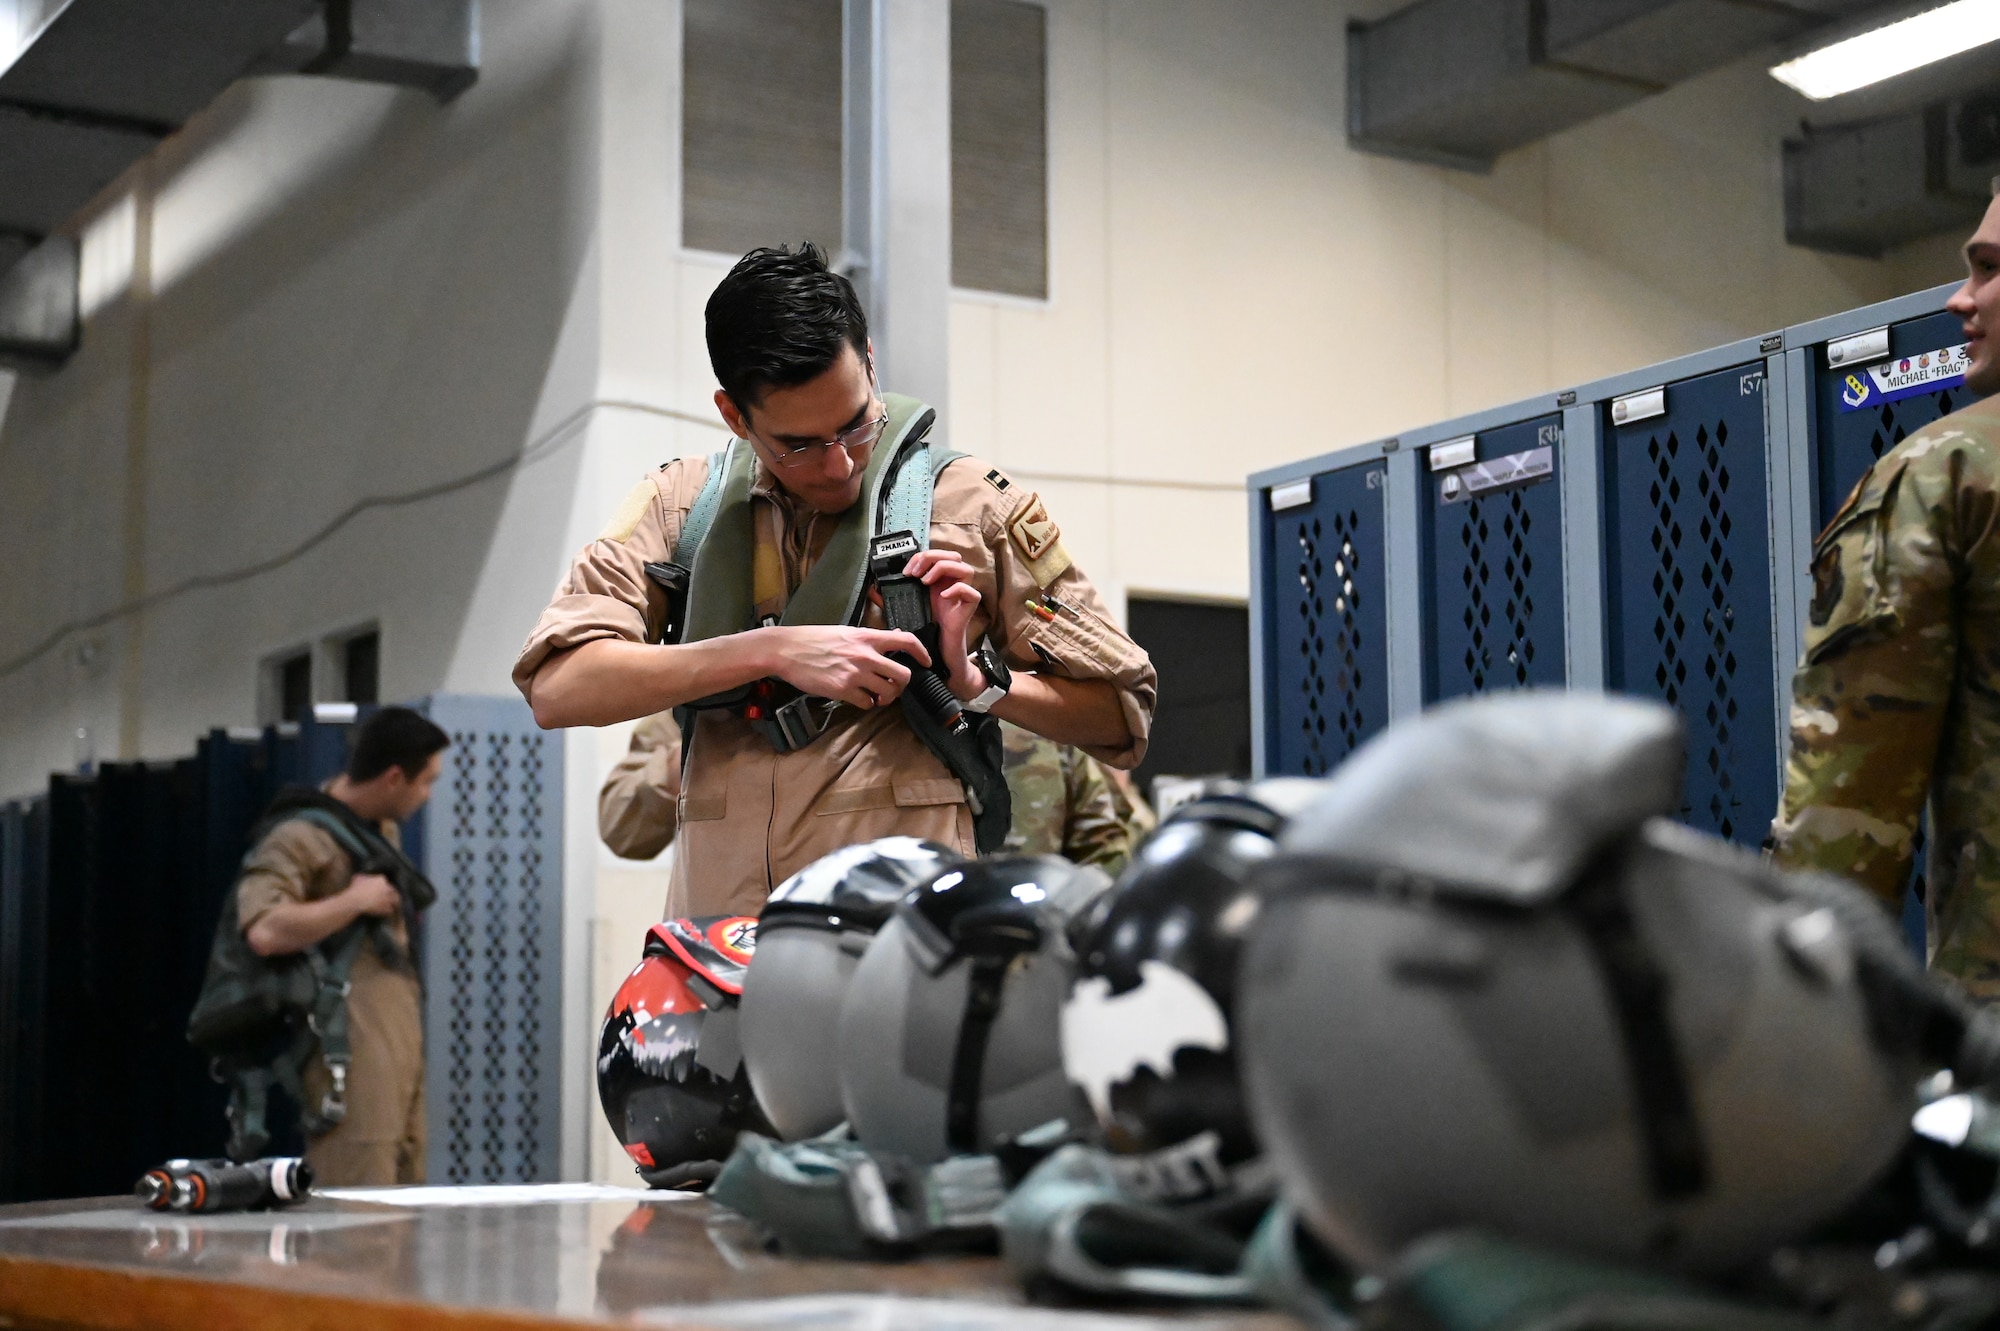 An aircrew member from the 28th Operations Group, Ellsworth Air Force Base, South Dakota, puts on flight equipment at the Aircrew Flight Equipment shop at Dyess Air Force Base, Texas, Feb. 1, 2024. Ellsworth Air Force Base B-1Bs recently launched from Dyess Air Force Base to support U.S. Central Command priorities, validating the United States Air Force capability to provide precision, long-range strike anytime, anywhere. (U.S. Air Force photo by Staff Sgt. Holly Cook)